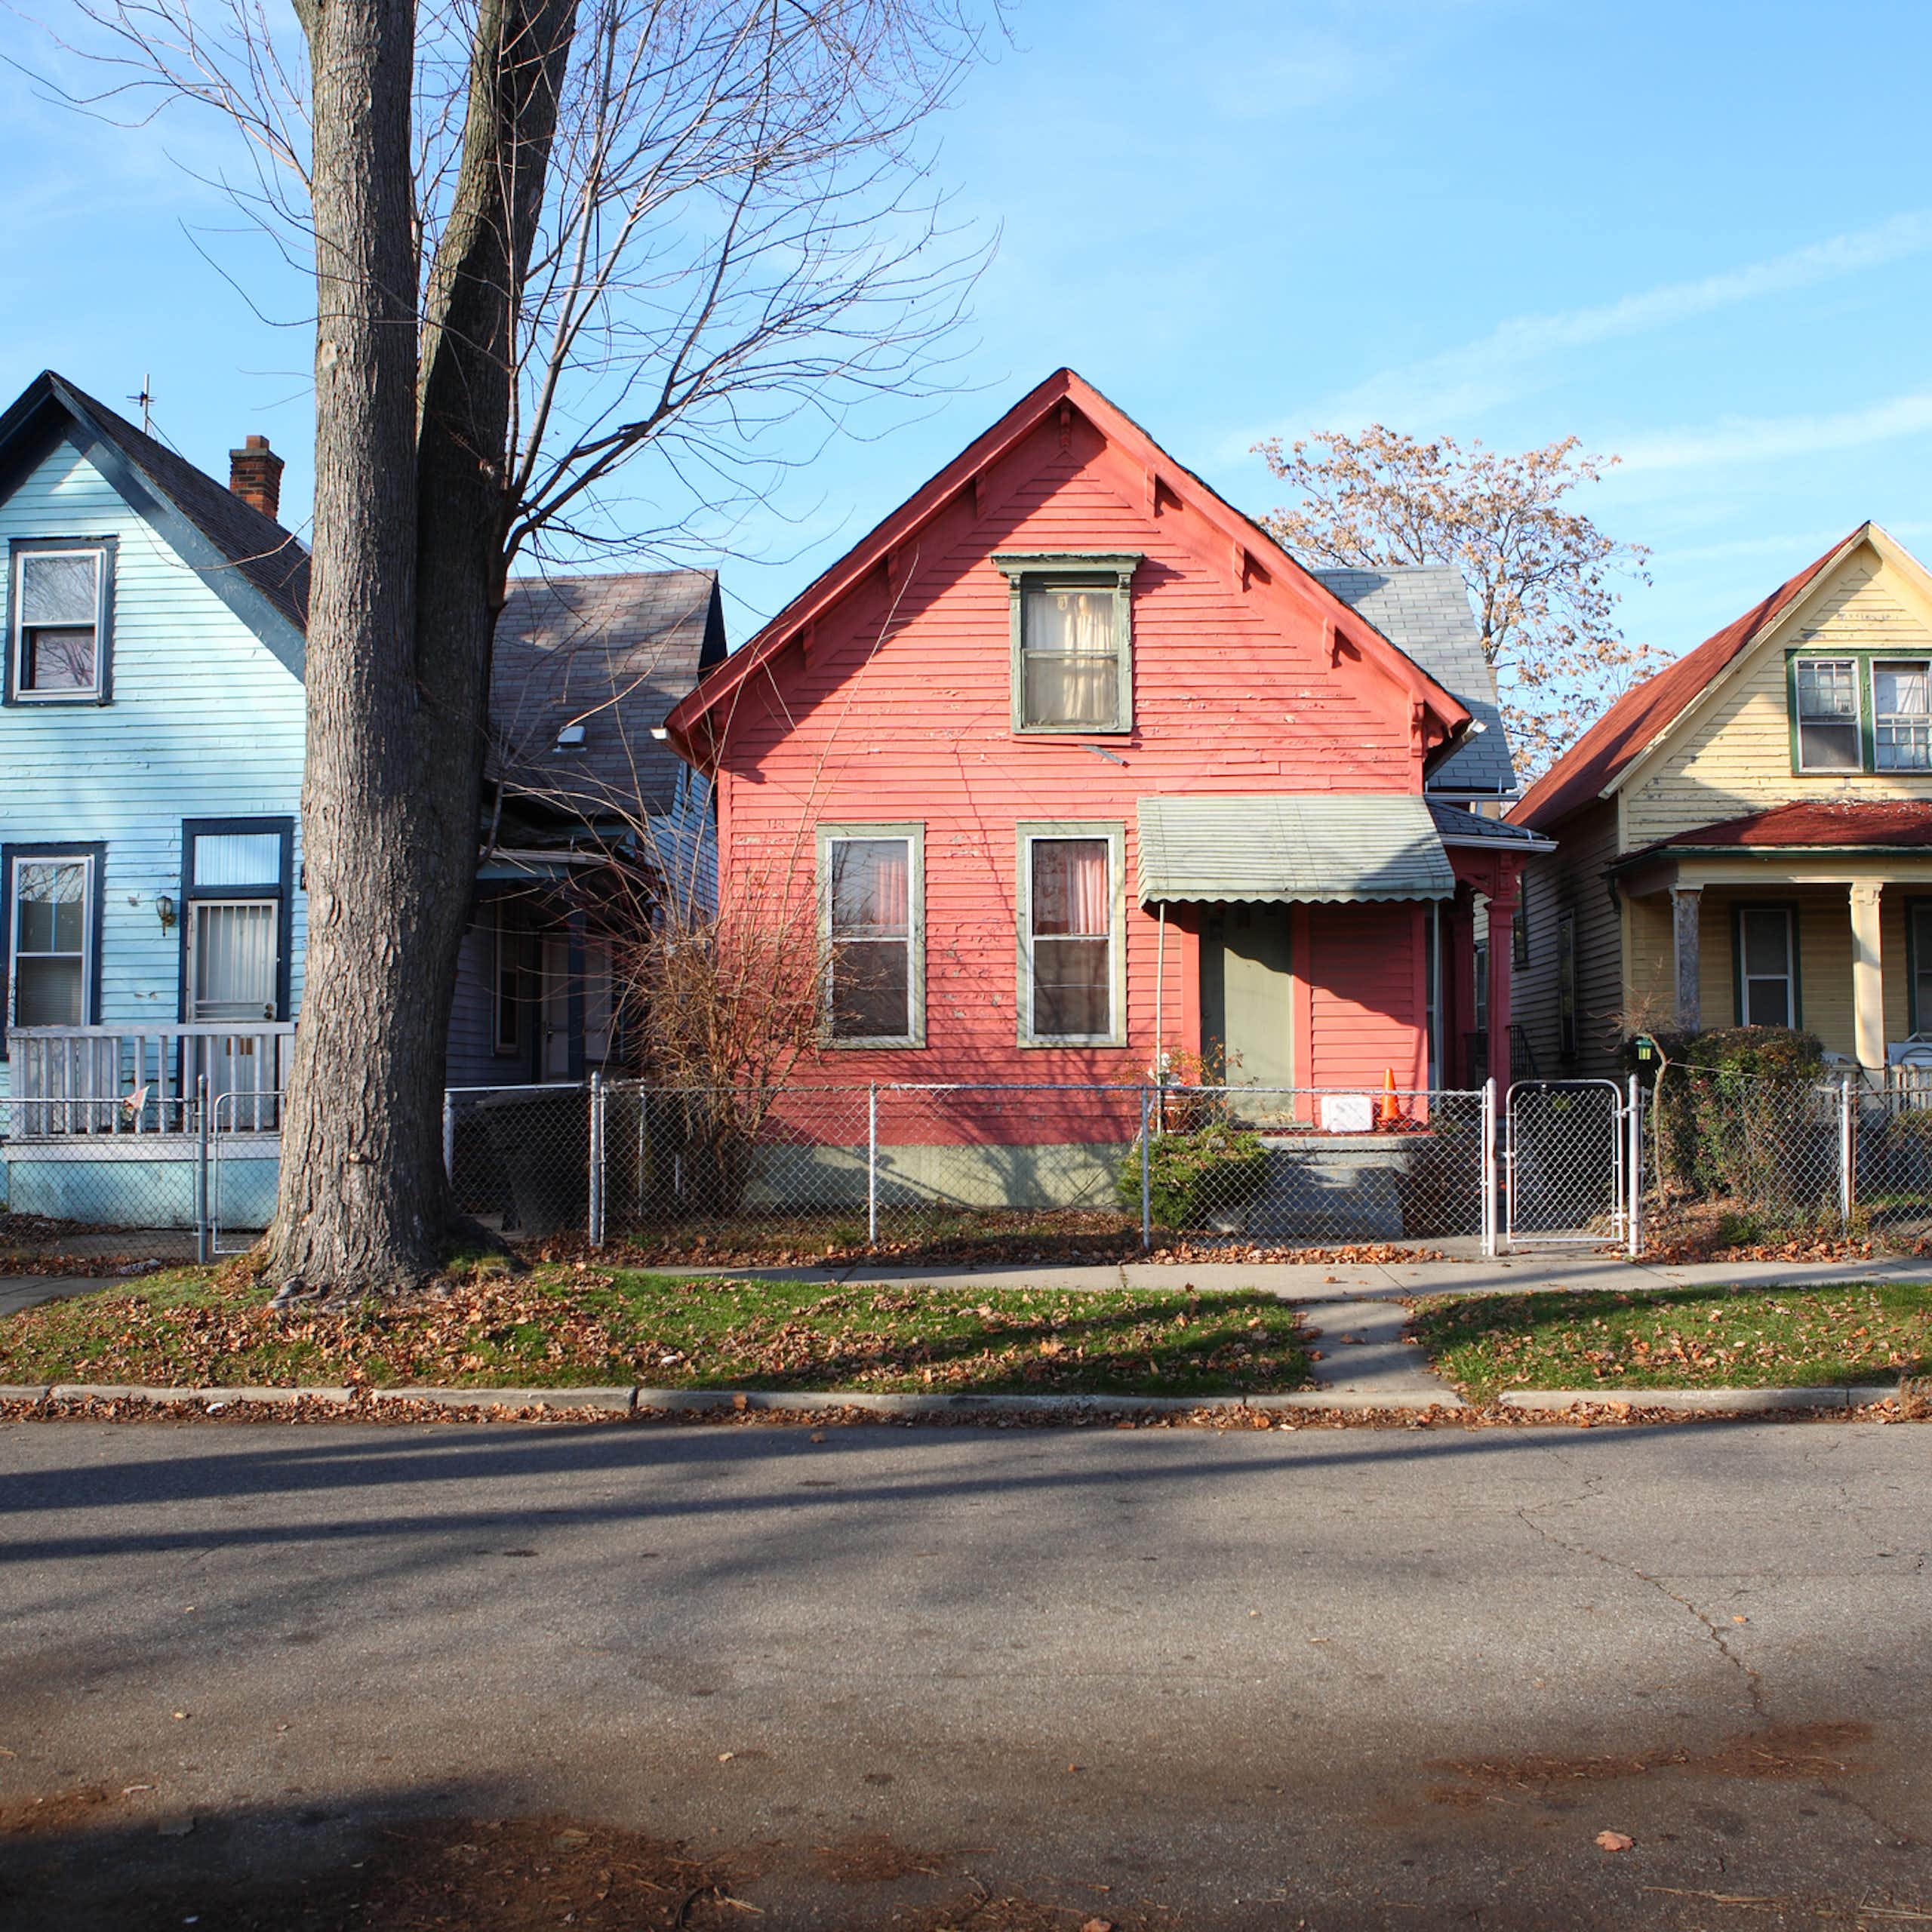 Multicolored 1920s-era rowhouses appear on a sunny day in Detroit.